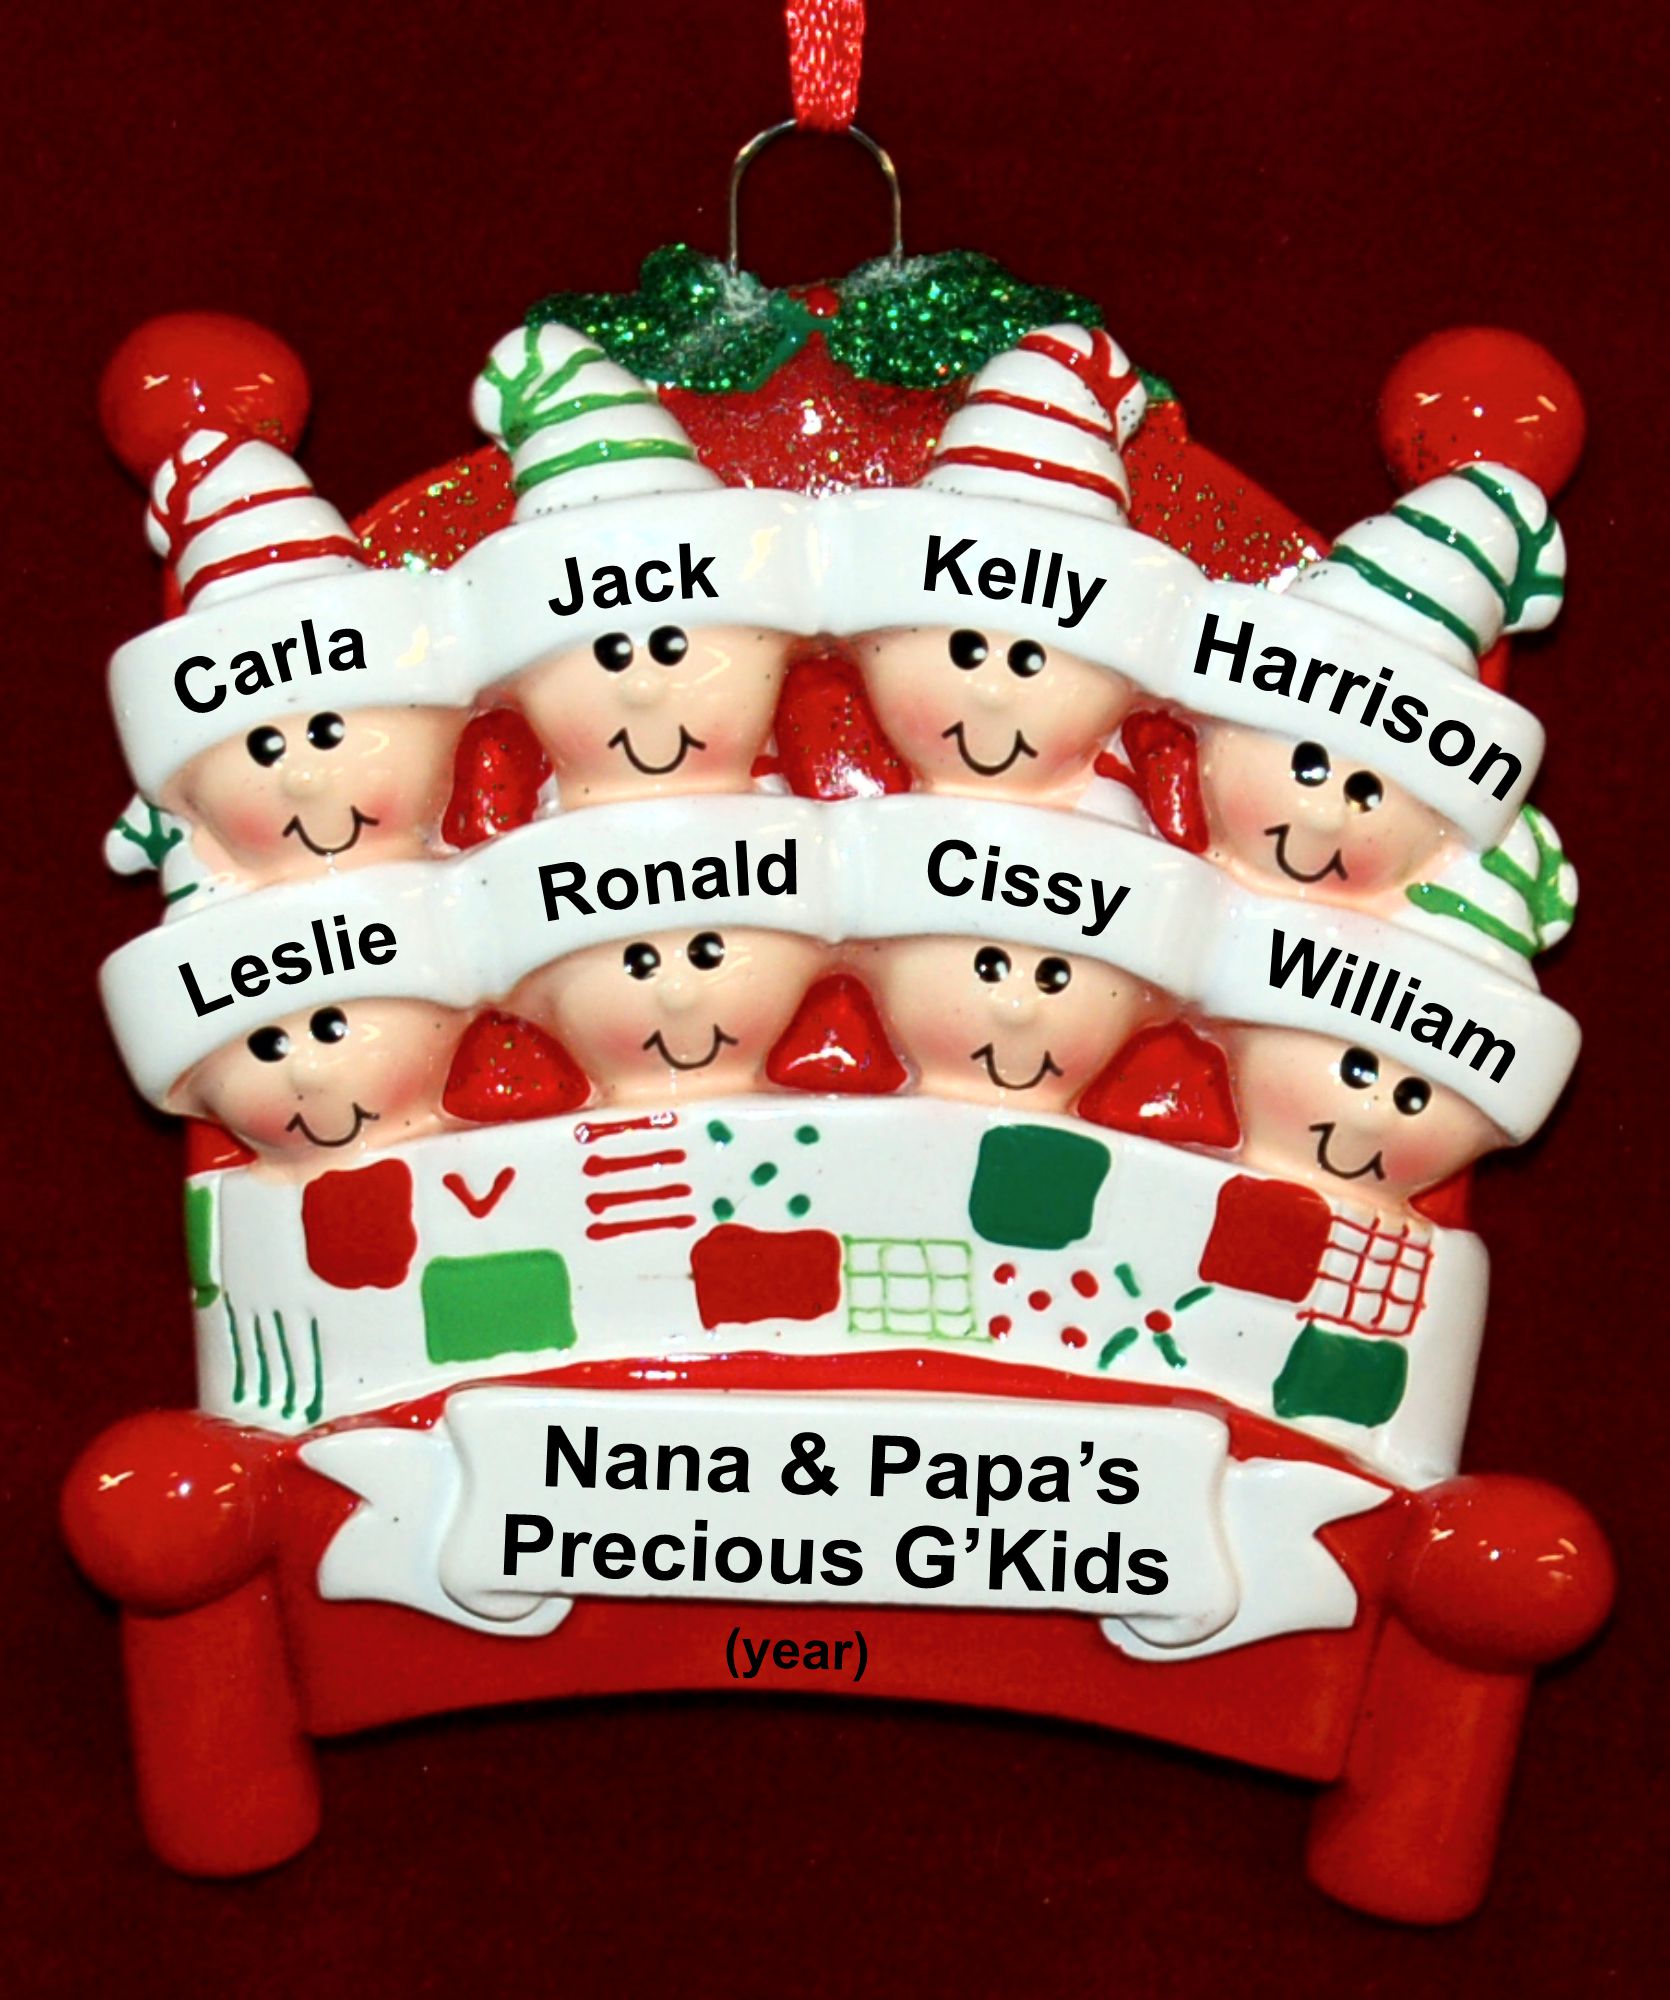 Grandparents Christmas Fun 8 Grandkids Personalized FREE by Russell Rhodes